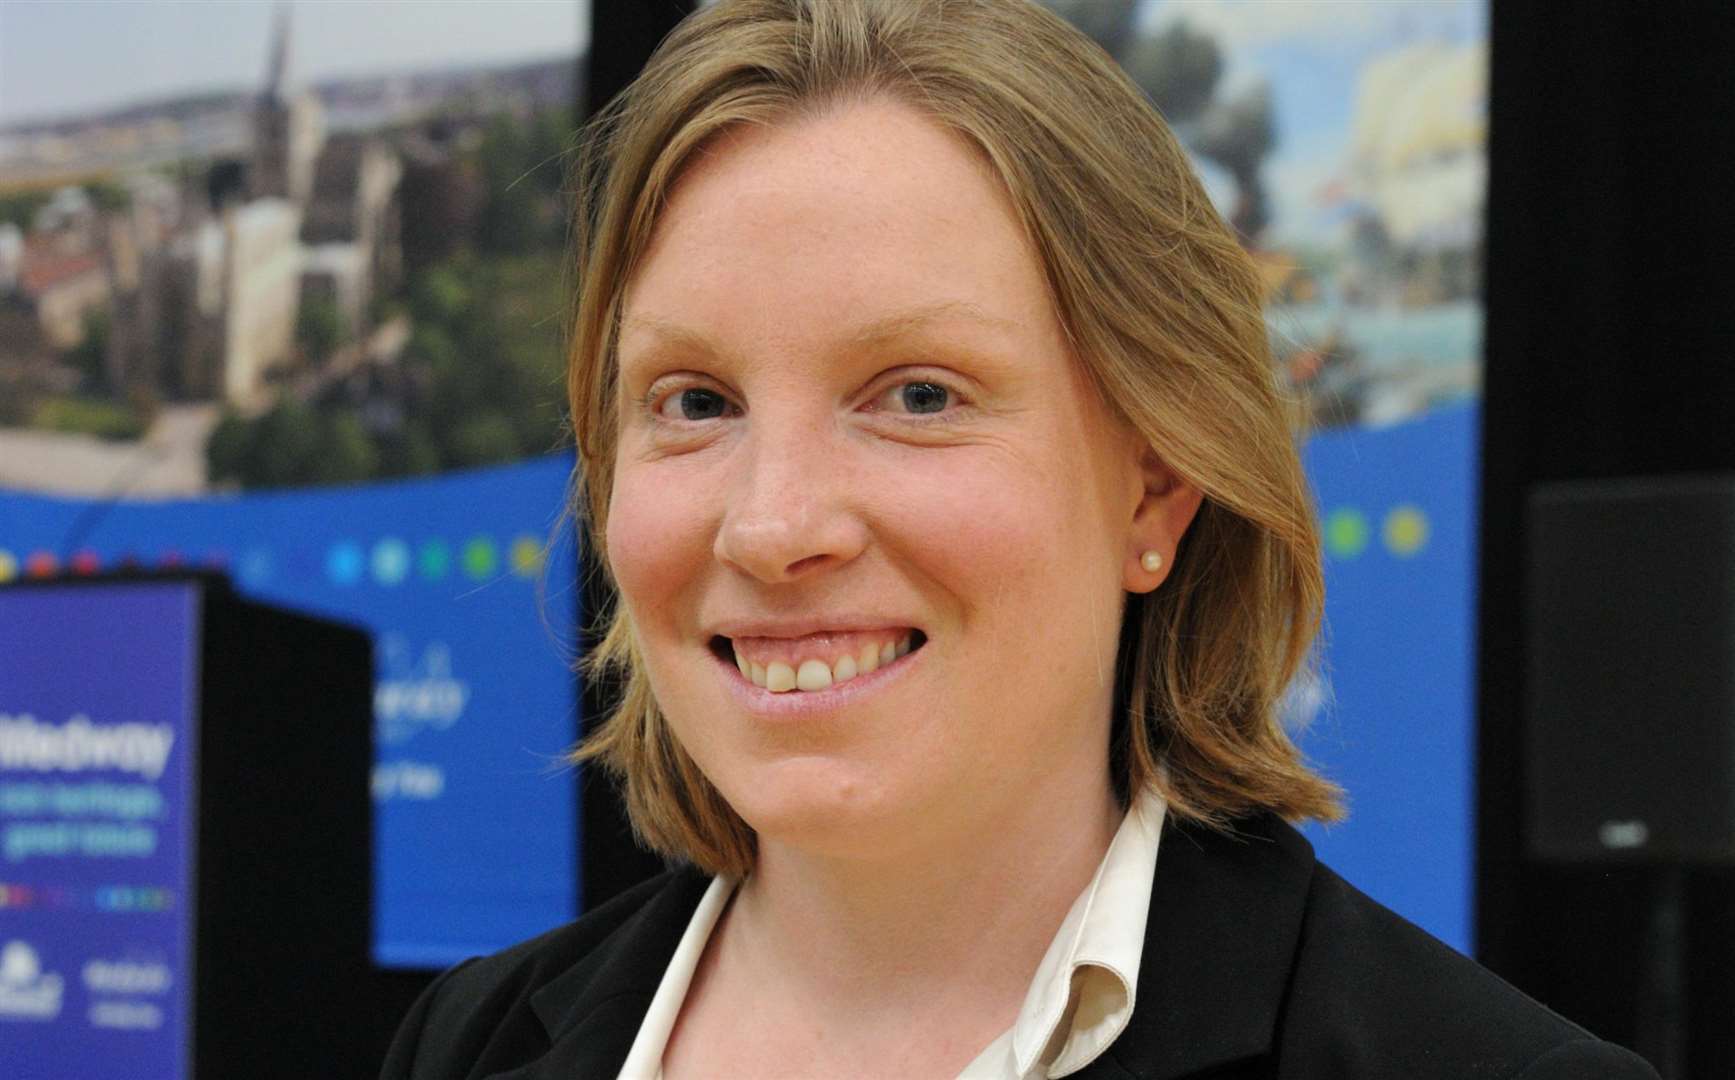 Minister for sport and civil society Tracey Crouch